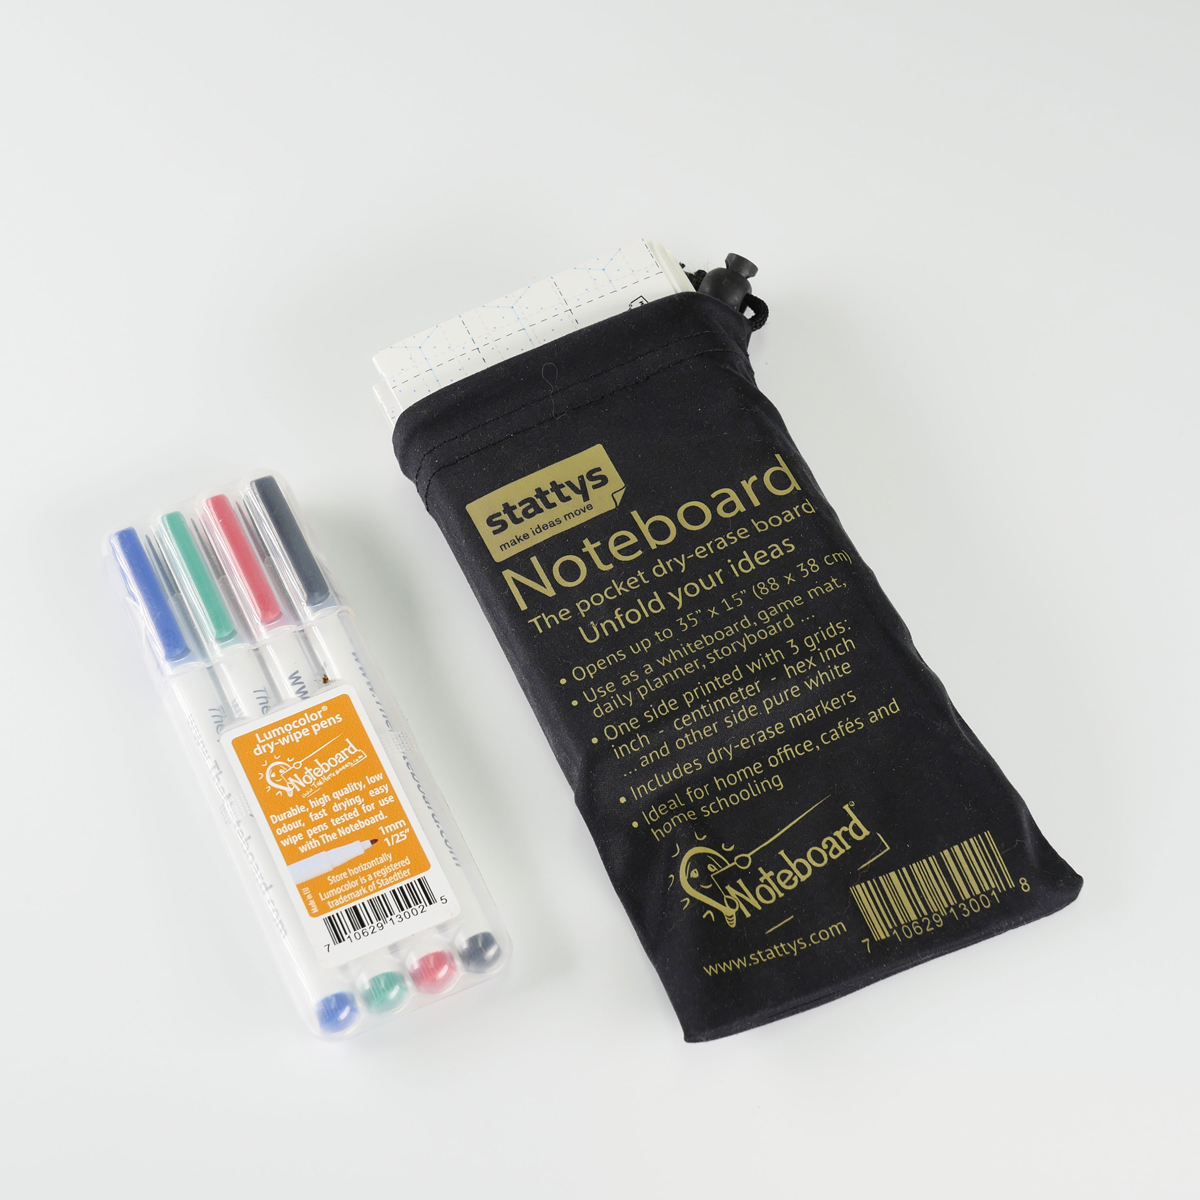 Take Note! Dry Erase Markers - 4-Color Set